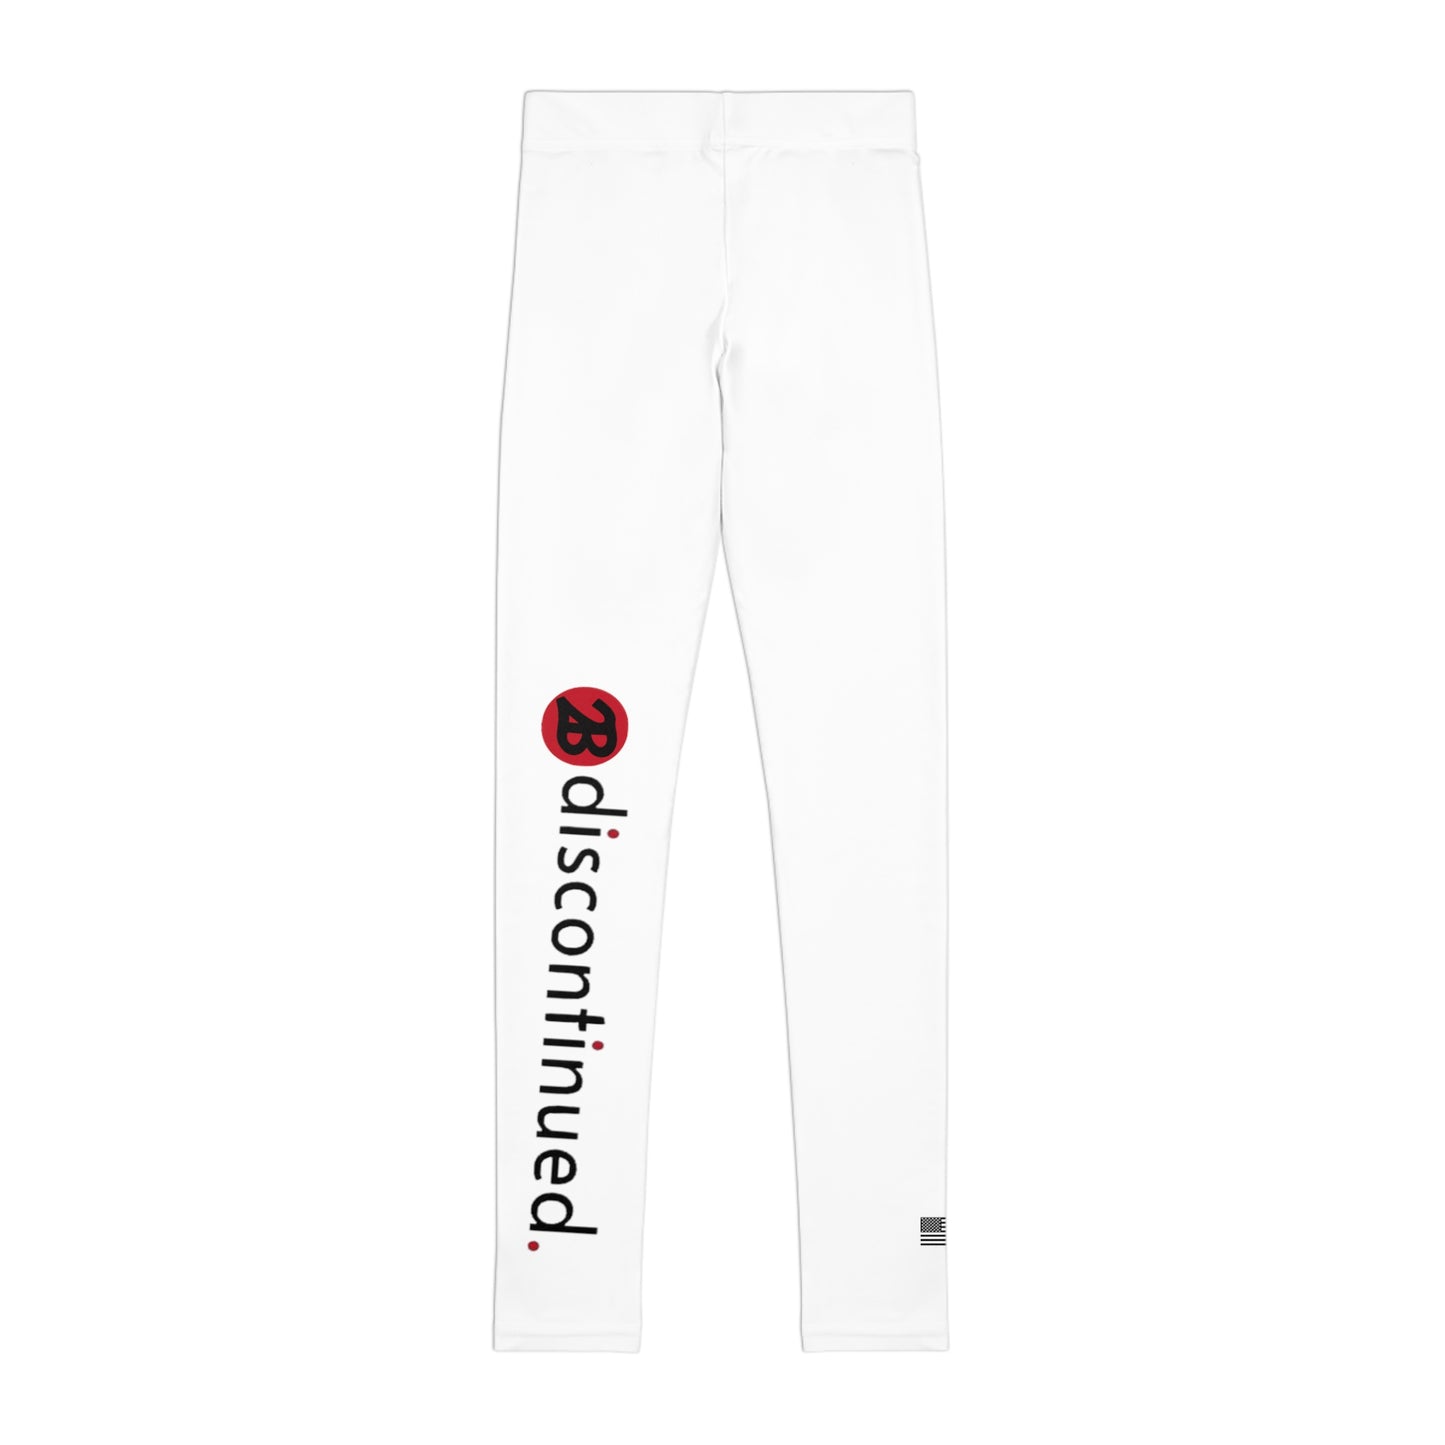 2Bdiscontinued. youthlLeggings wht